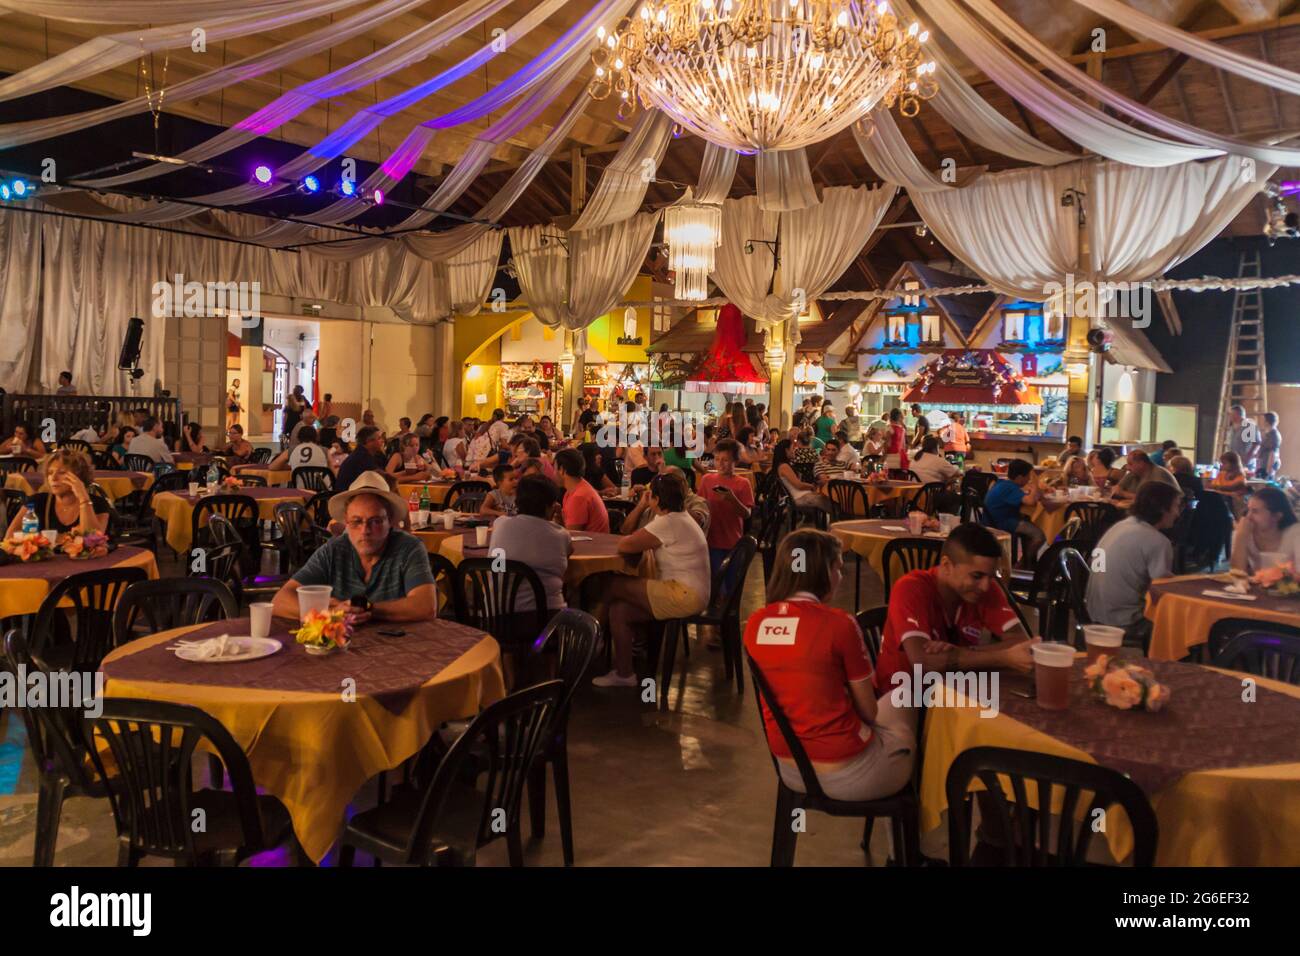 VILLA GENERAL BELGRANO, ARGENTINA - APR 3, 2015: German style beer hall in Villa General Belgrano, Argentina. Village now serves as a Germany styled t Stock Photo